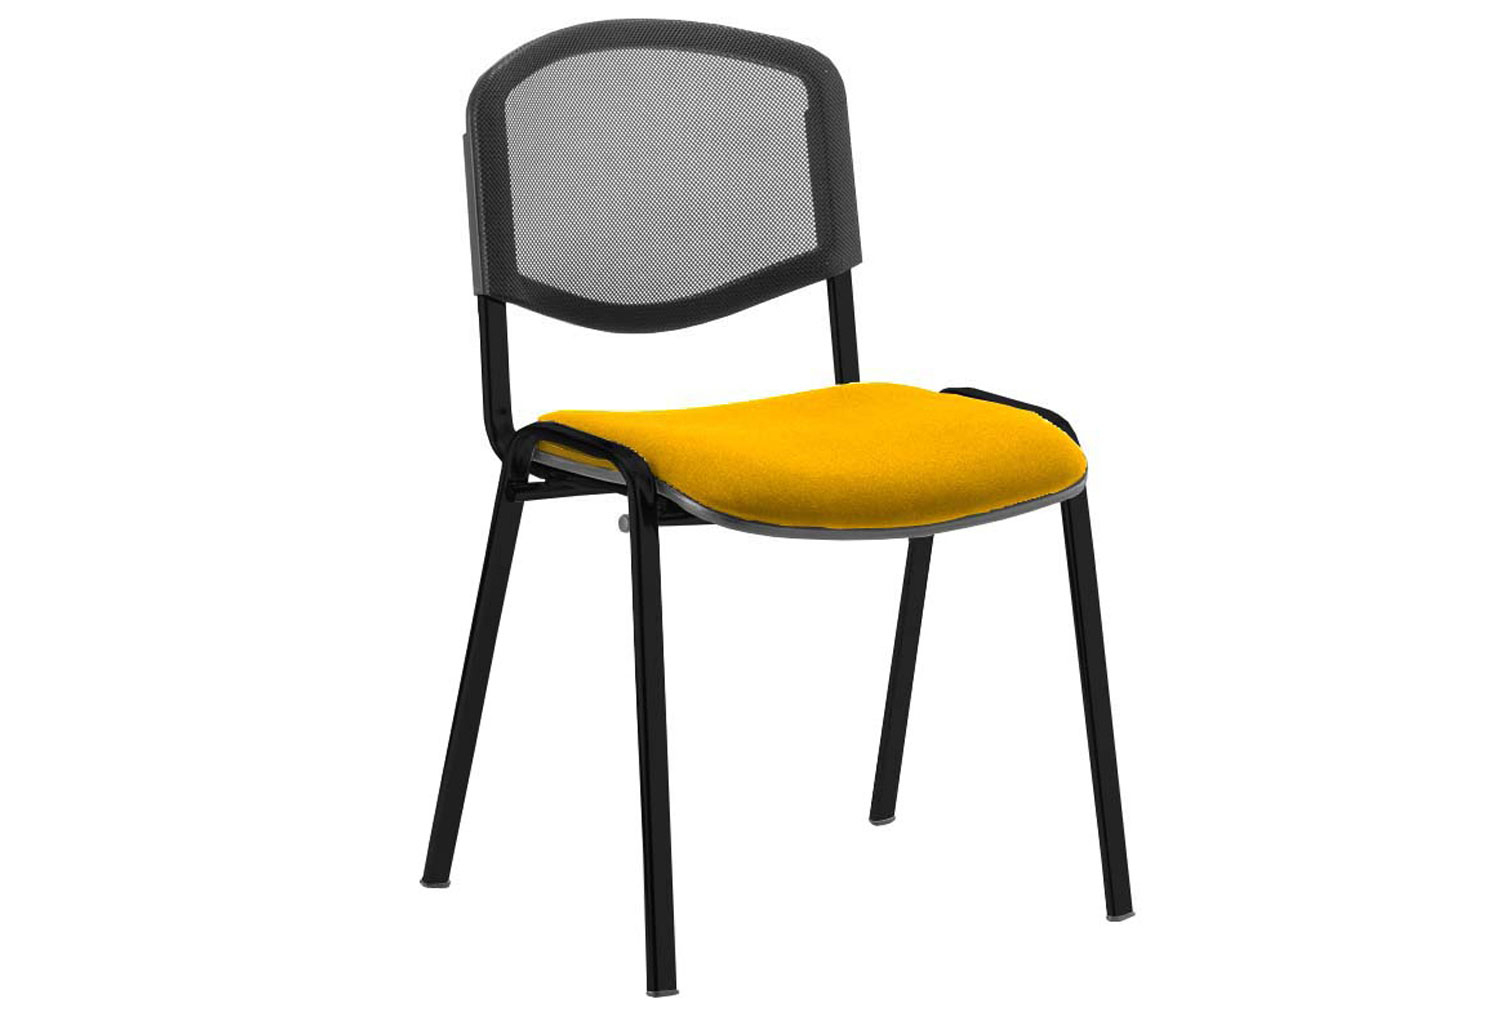 Qty 4 - ISO Black Frame Mesh Back Conference Office Chair (Senna Yellow)